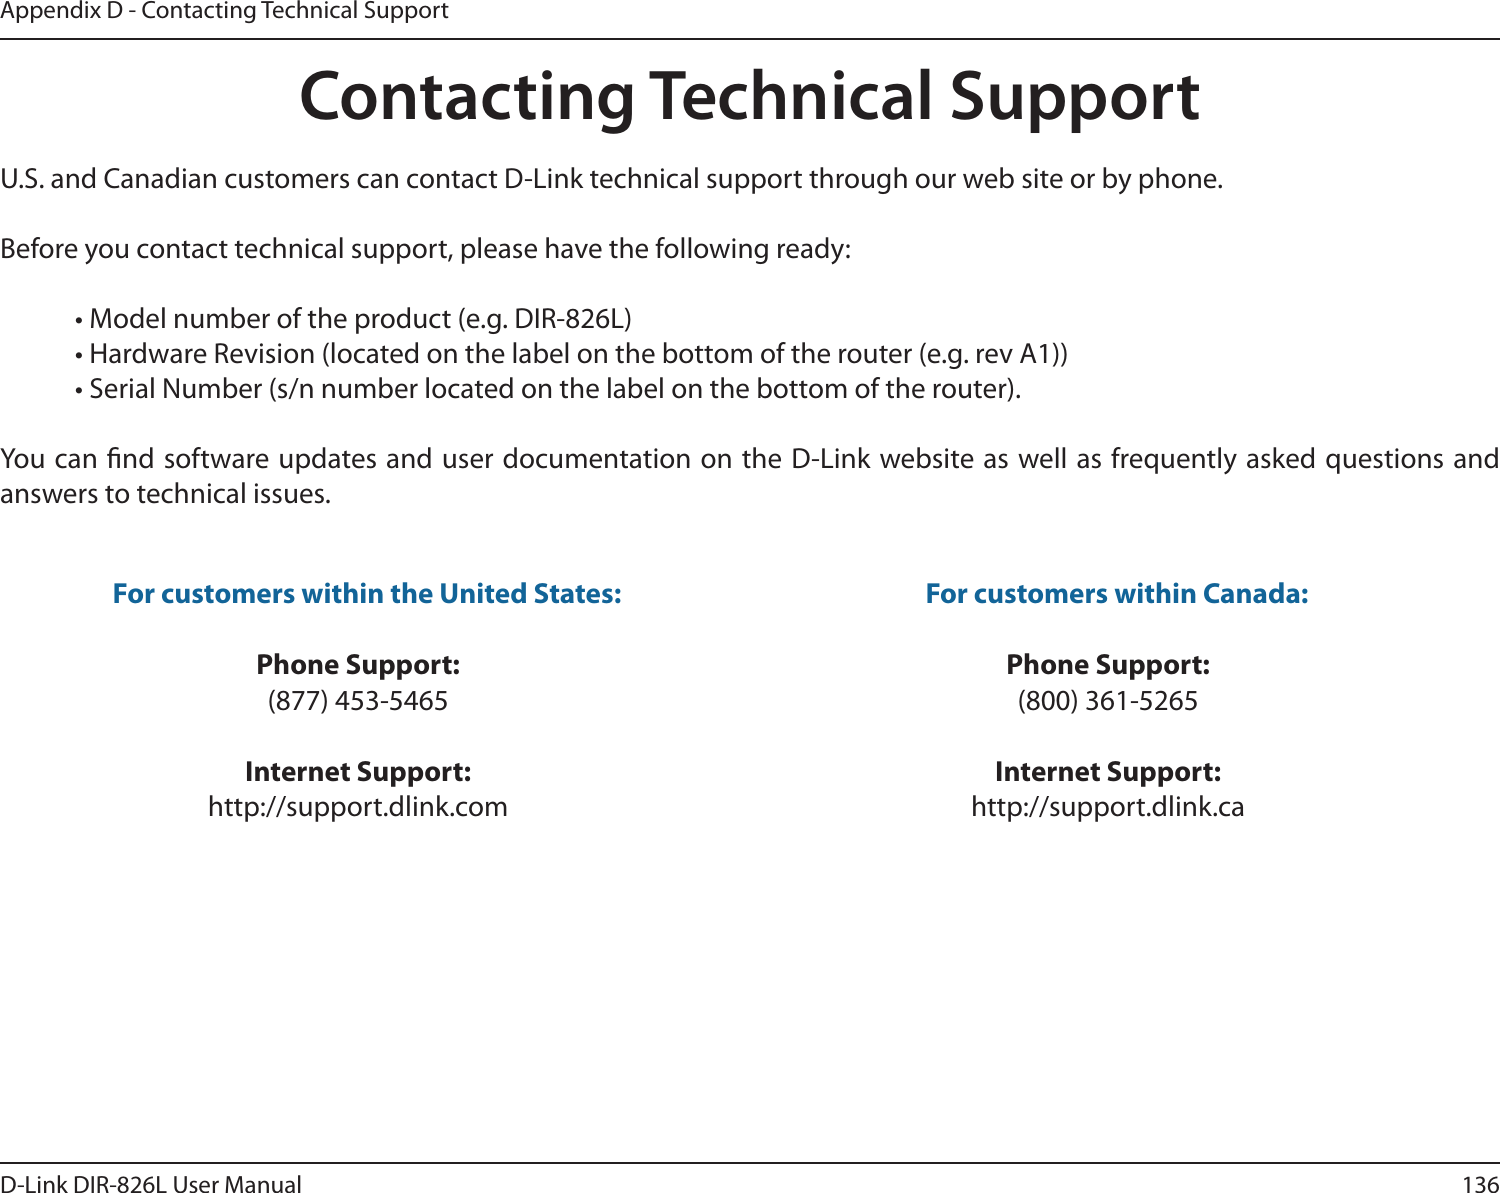 136D-Link DIR-826L User ManualAppendix D - Contacting Technical SupportContacting Technical SupportU.S. and Canadian customers can contact D-Link technical support through our web site or by phone.Before you contact technical support, please have the following ready:  • Model number of the product (e.g. DIR-826L)  • Hardware Revision (located on the label on the bottom of the router (e.g. rev A1))  • Serial Number (s/n number located on the label on the bottom of the router). You can nd software updates and user documentation on the D-Link website as well as frequently asked questions and answers to technical issues.For customers within the United States: Phone Support:(877) 453-5465Internet Support:http://support.dlink.com For customers within Canada: Phone Support:(800) 361-5265Internet Support:http://support.dlink.ca 